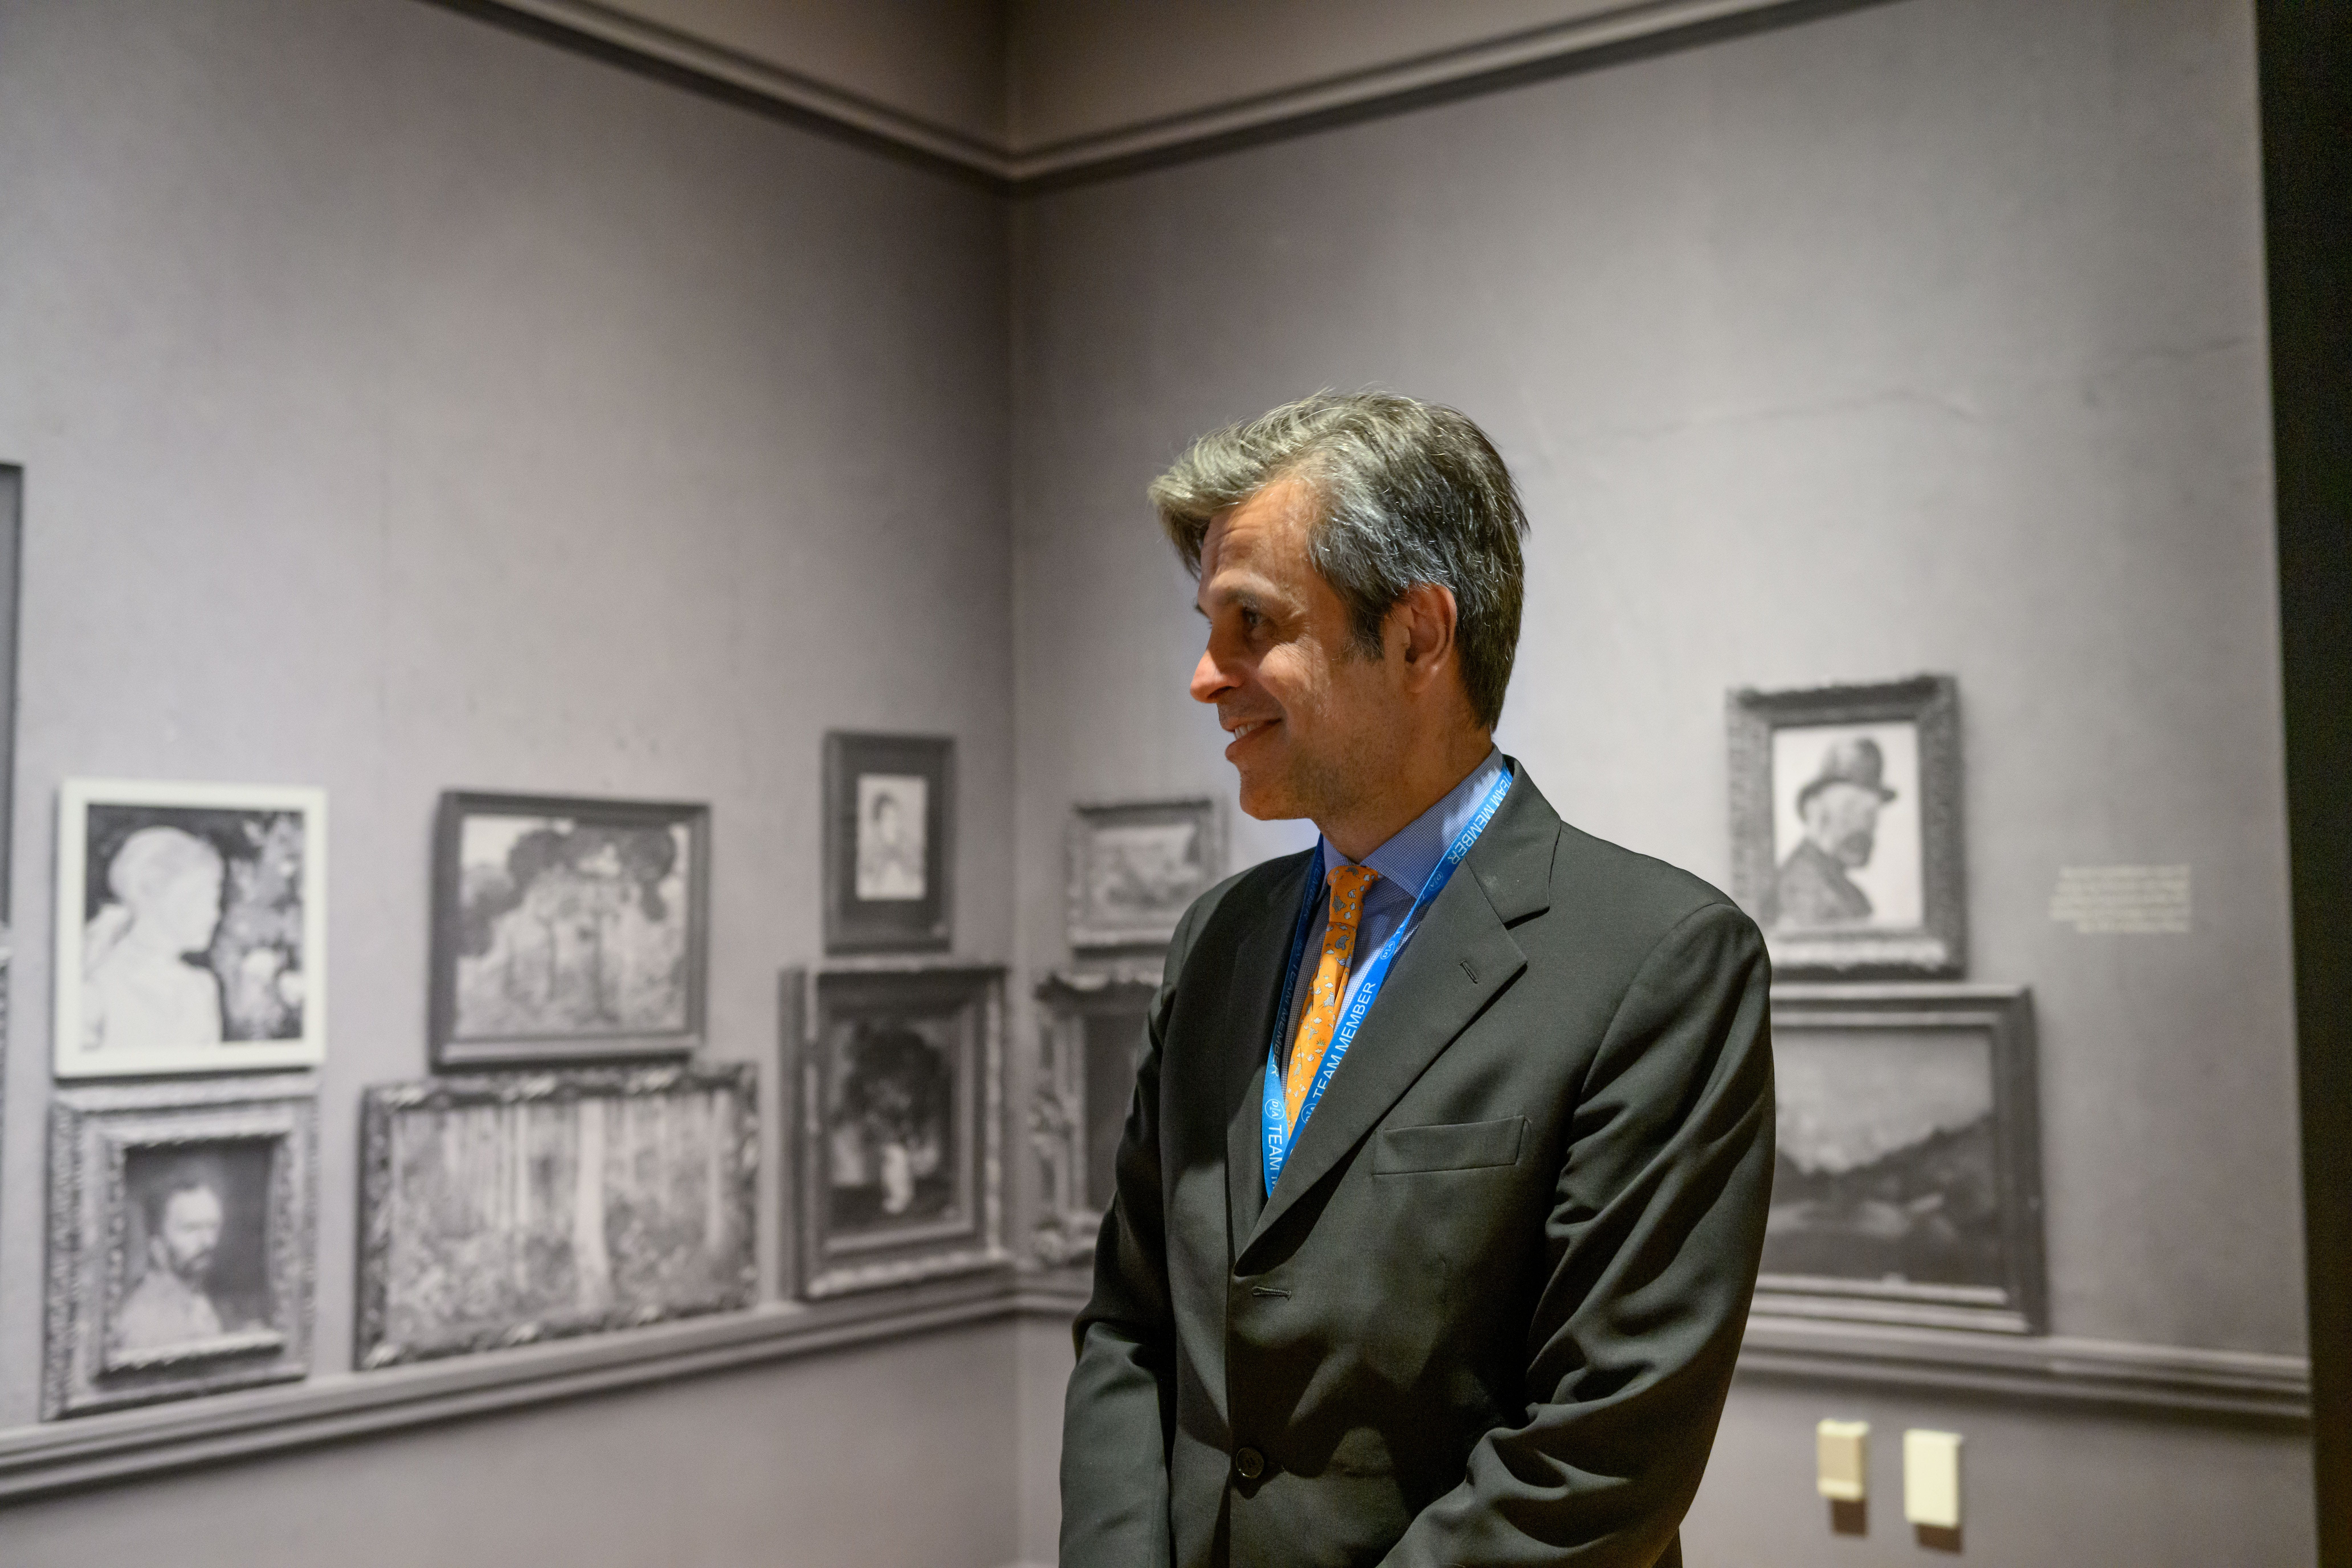 Salvador Salort-Pons, director and president of the Detroit Institute of Arts, stands inside the Van Gogh in America exhibit, September 27, 2022.